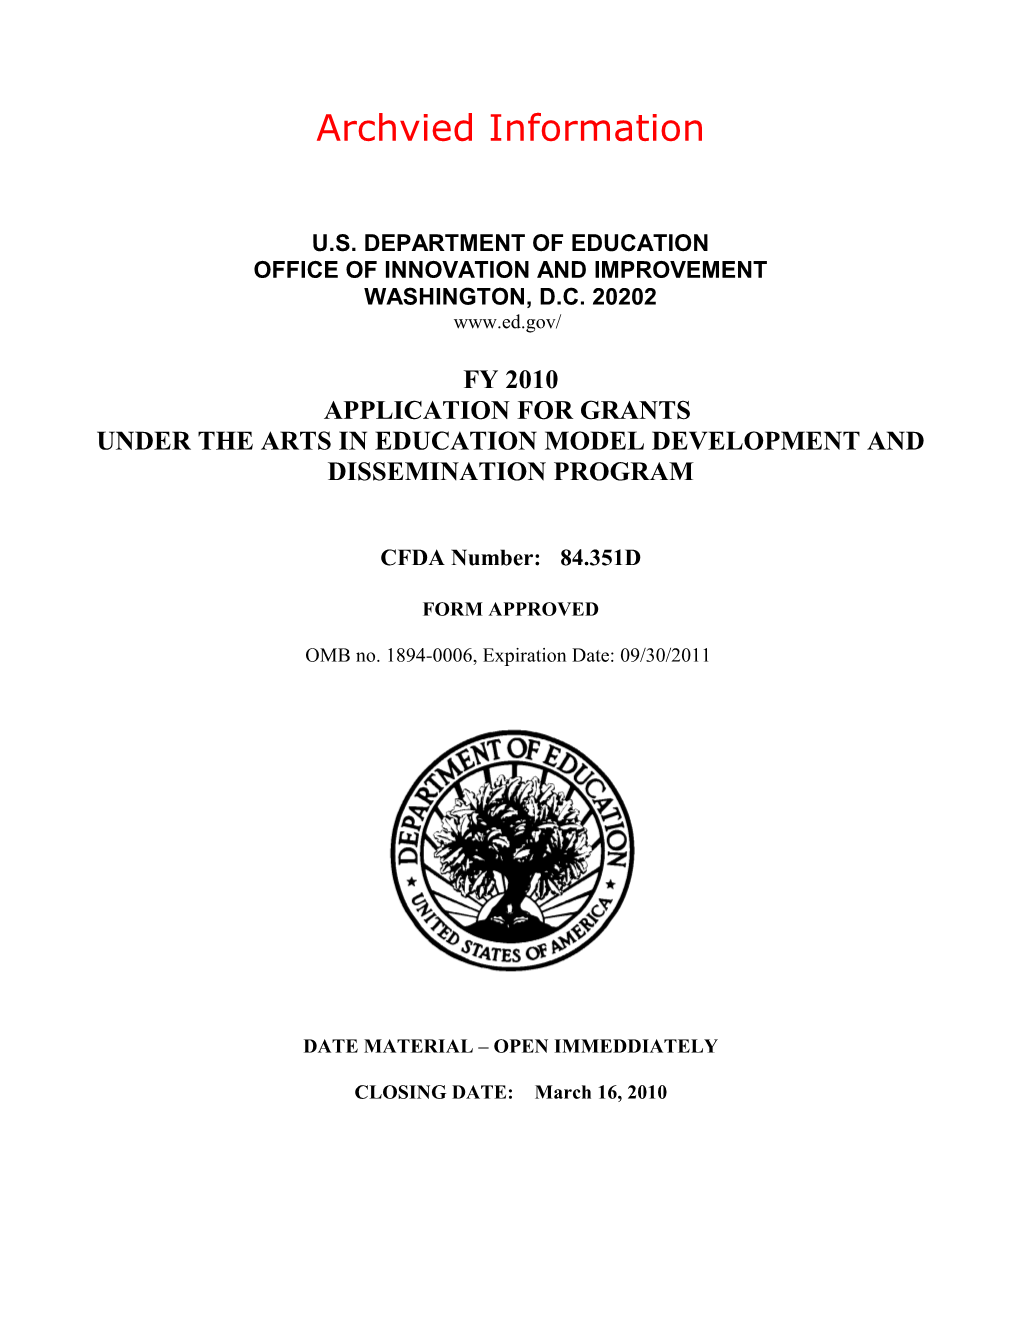 Archived: Arts Model and Dissemination Grant Application FY2010 Package (MS Word)